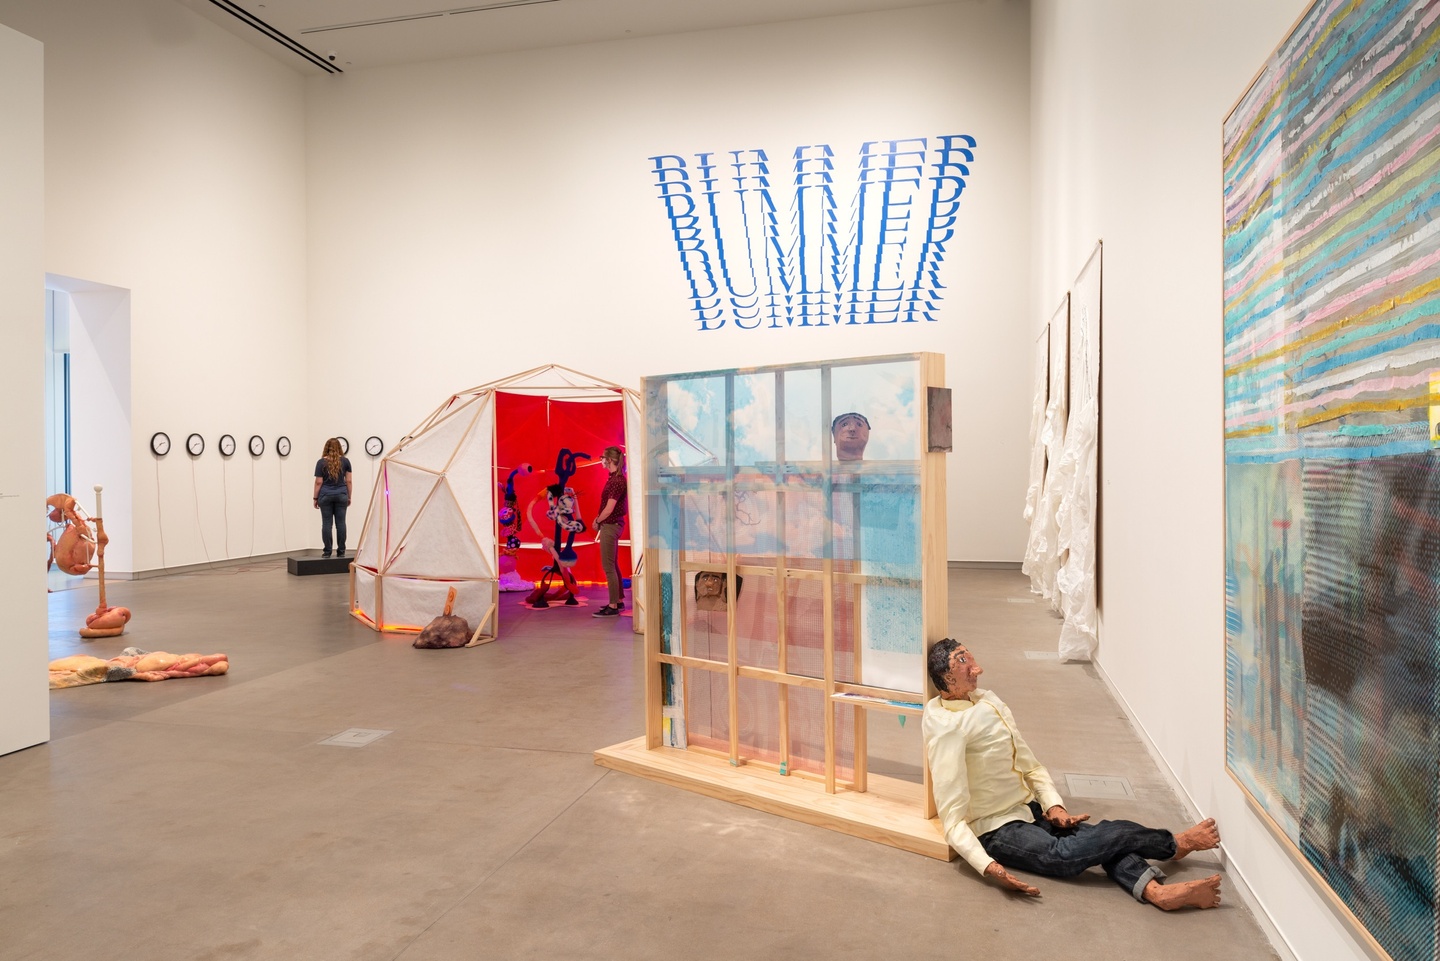 Installation view of artworks at Kemper Art Museum, including several clocks on the back side wall, a dome-like structure of white canvas and wooden pieces, opened to a bright reddish-pink interior with a person standing inside; the words "Bummer" written over and over in blue high on the back wall; a wooden, window-like sculpture with a 3D figure of a person sitting, leaned against it; and two pieces on the side wall, one in all white, the other featuring multi-colored horizontal stripes.